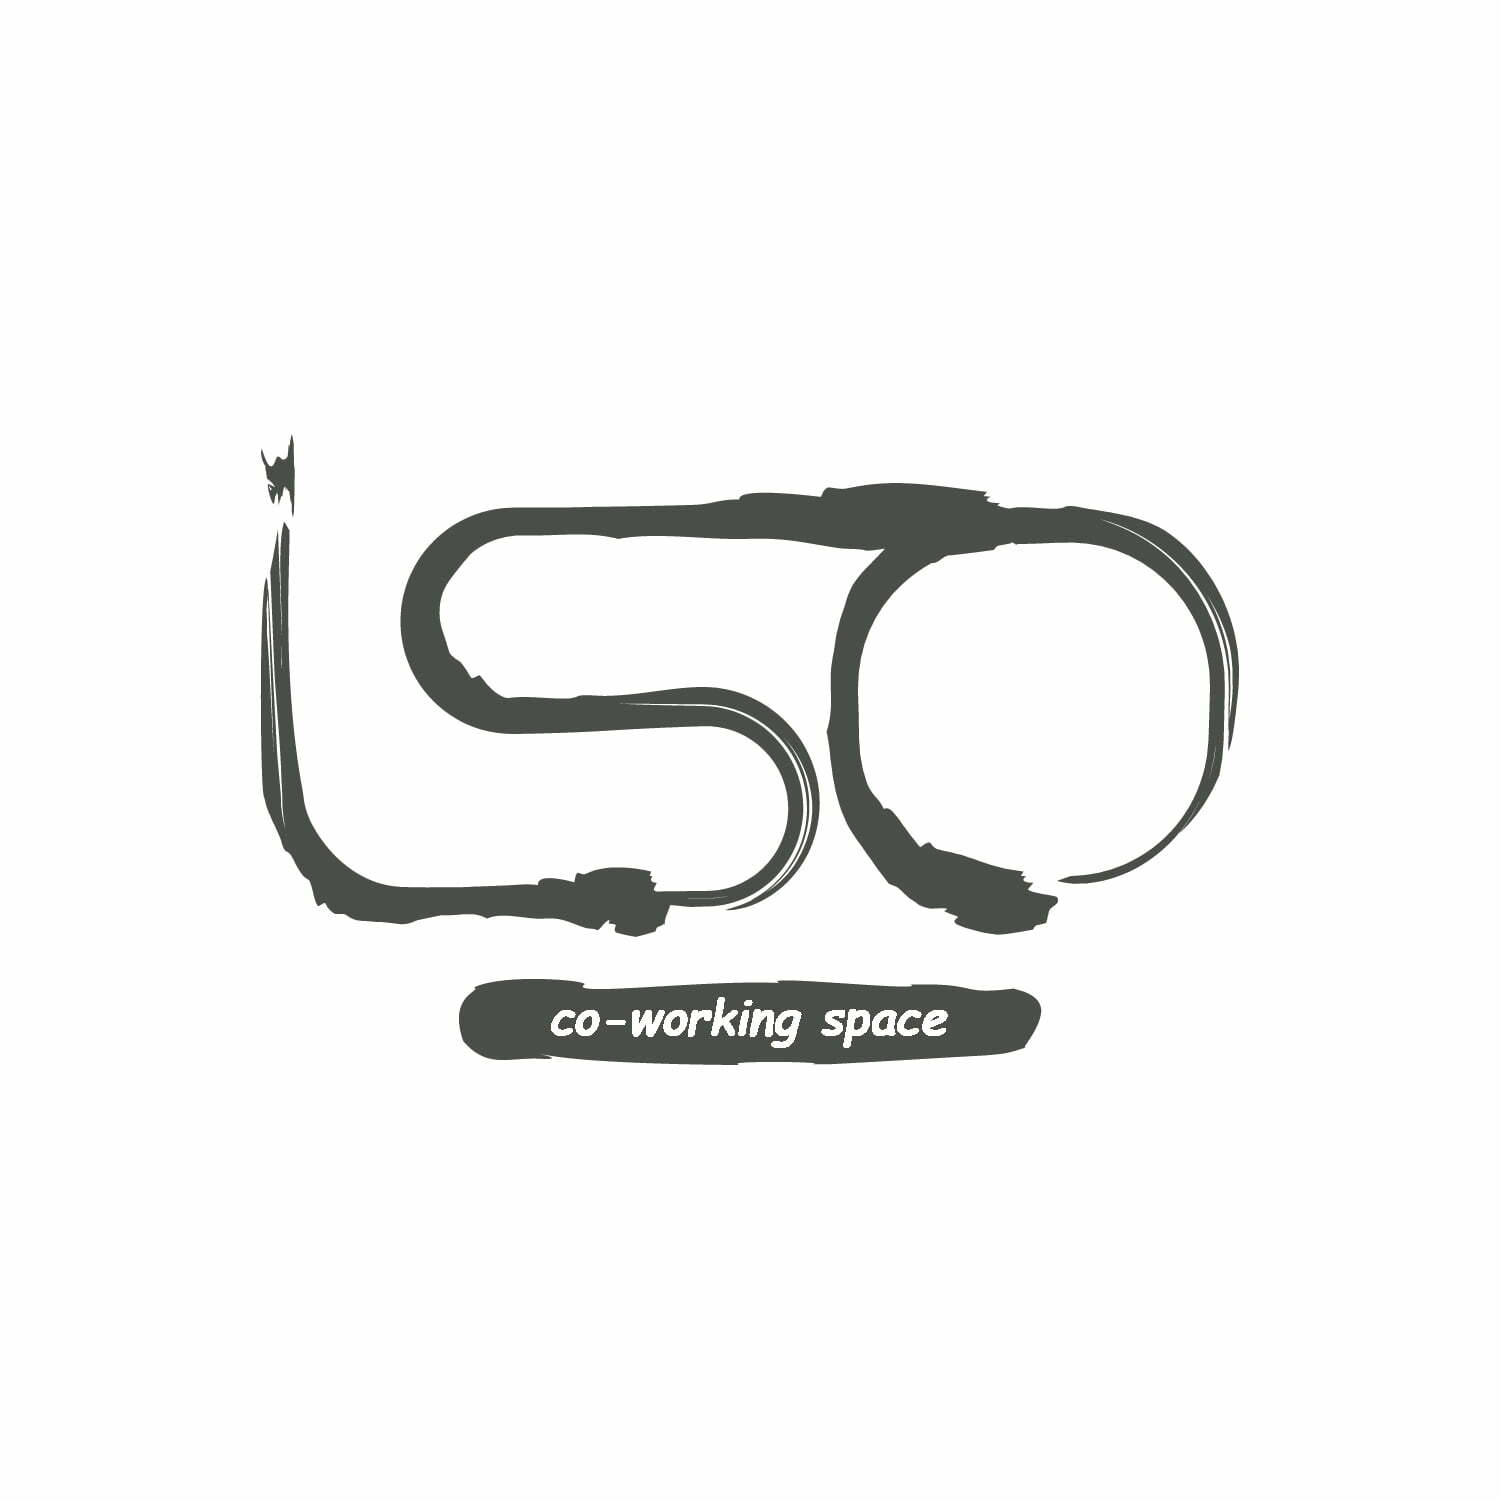 iso co-working space logo